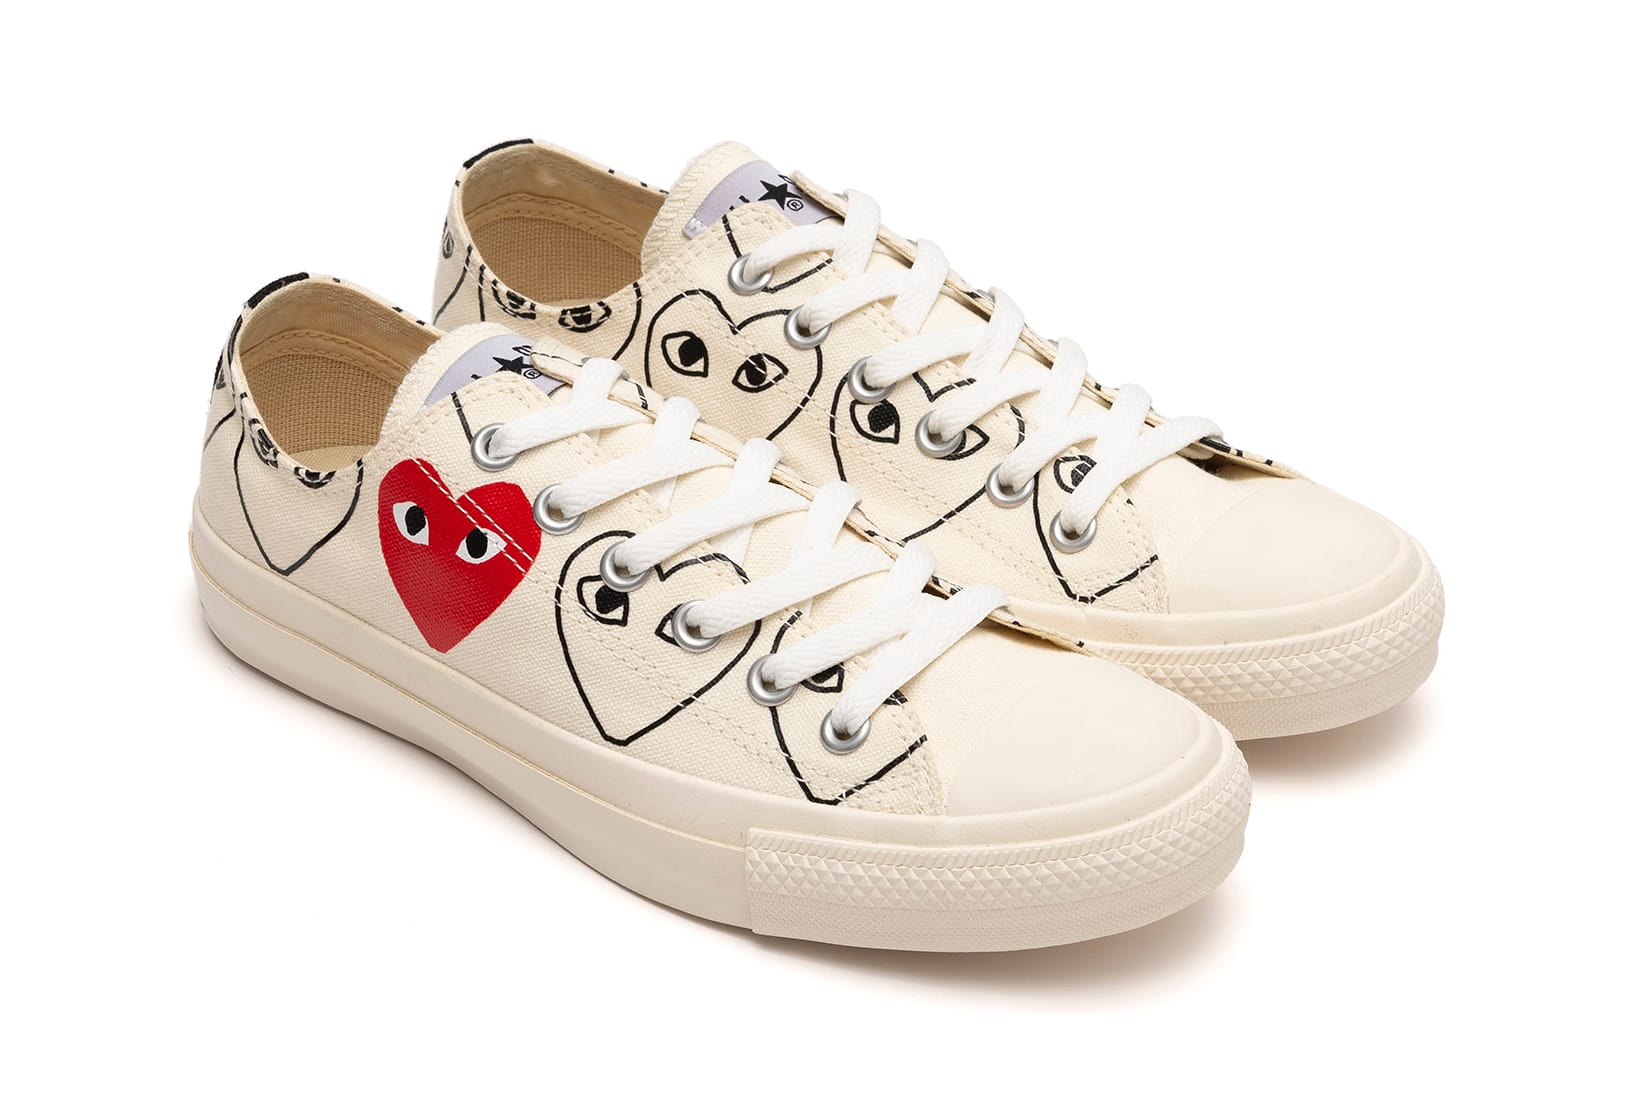 New COMME des GARCONS x Converse to 